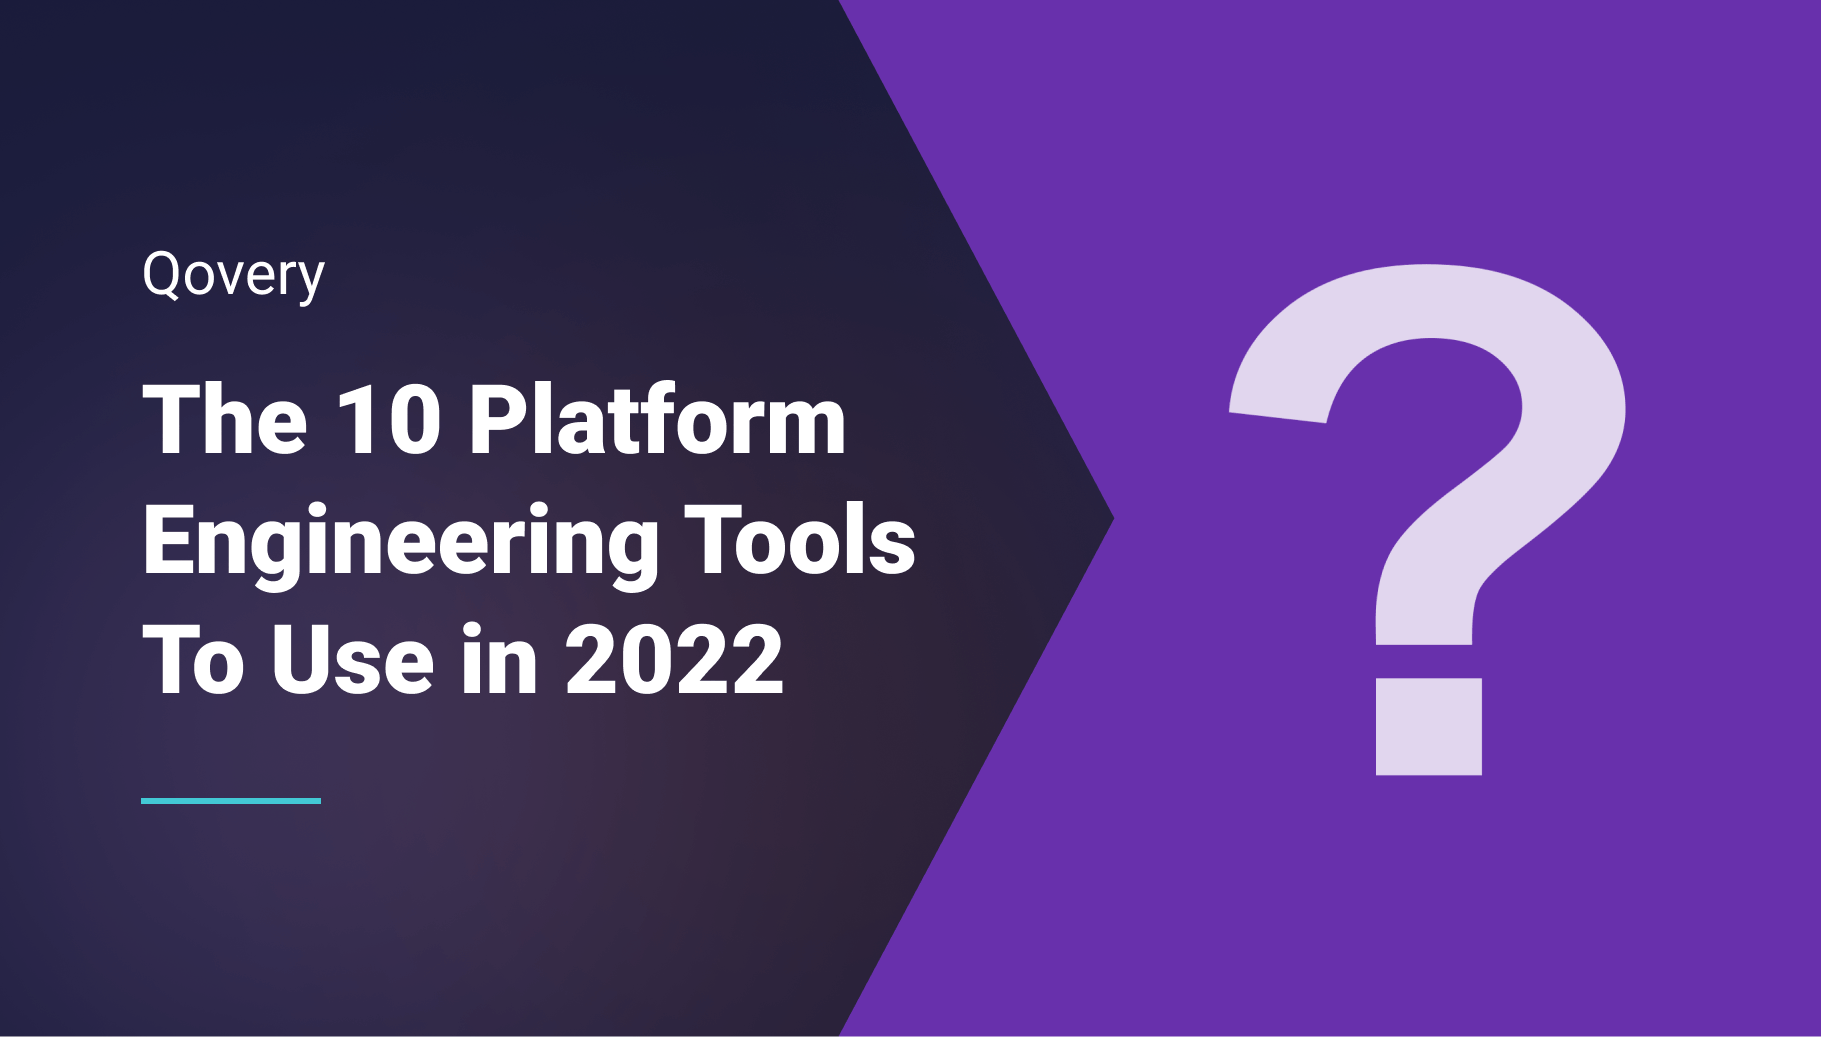 The 10 Platform Engineering Tools To Use in 2022 - Qovery